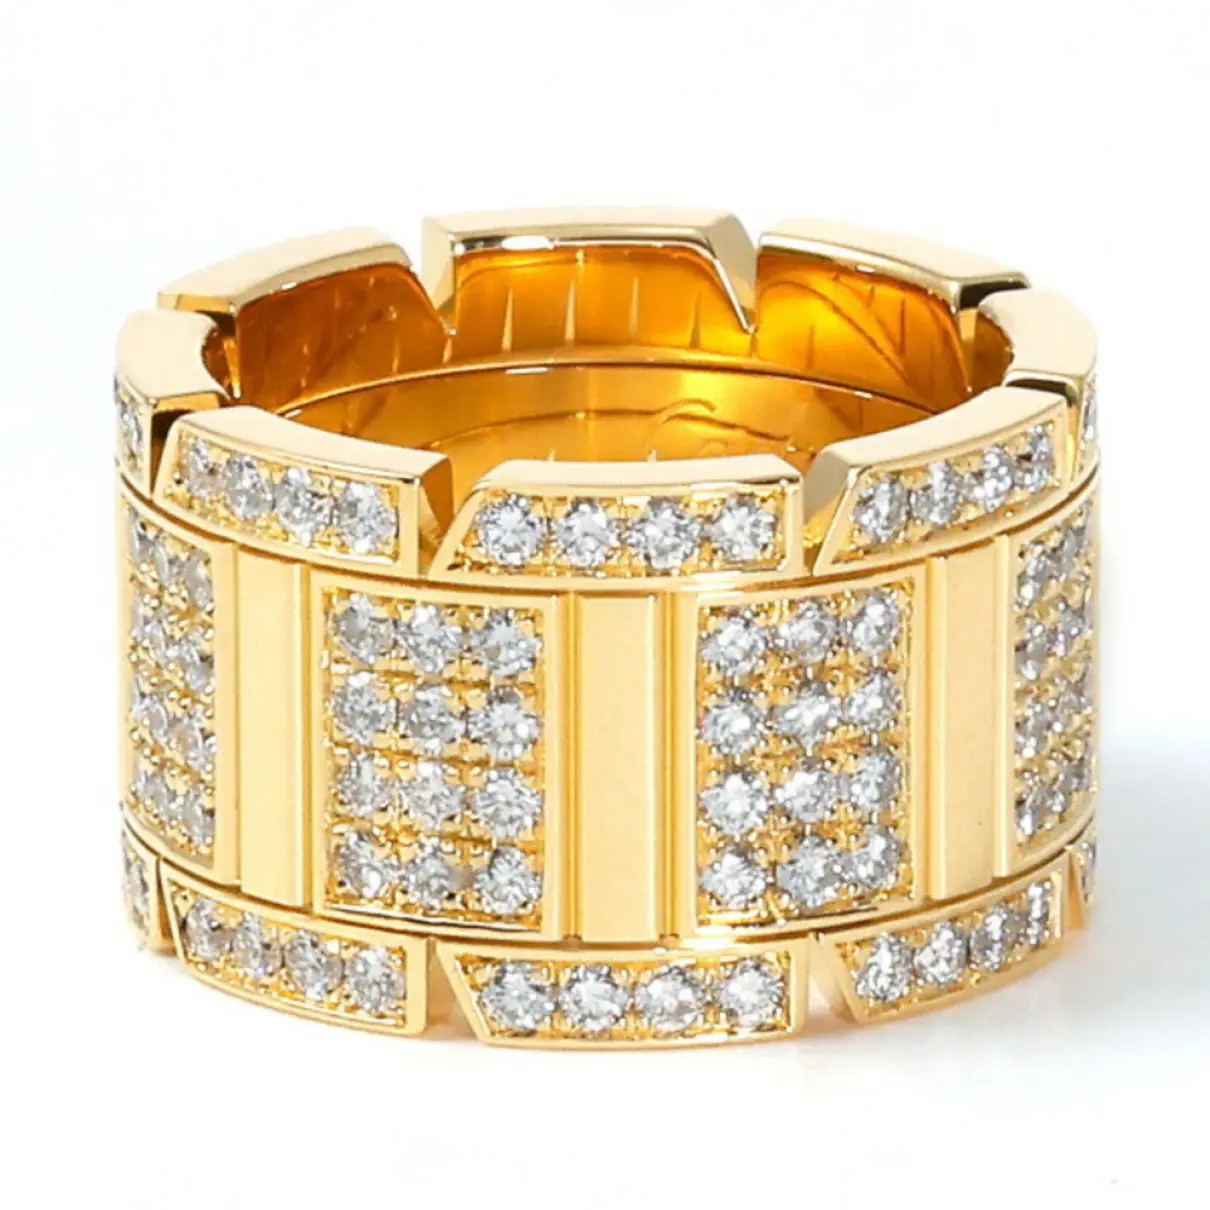 Buy Cartier Tank Française yellow gold ring online